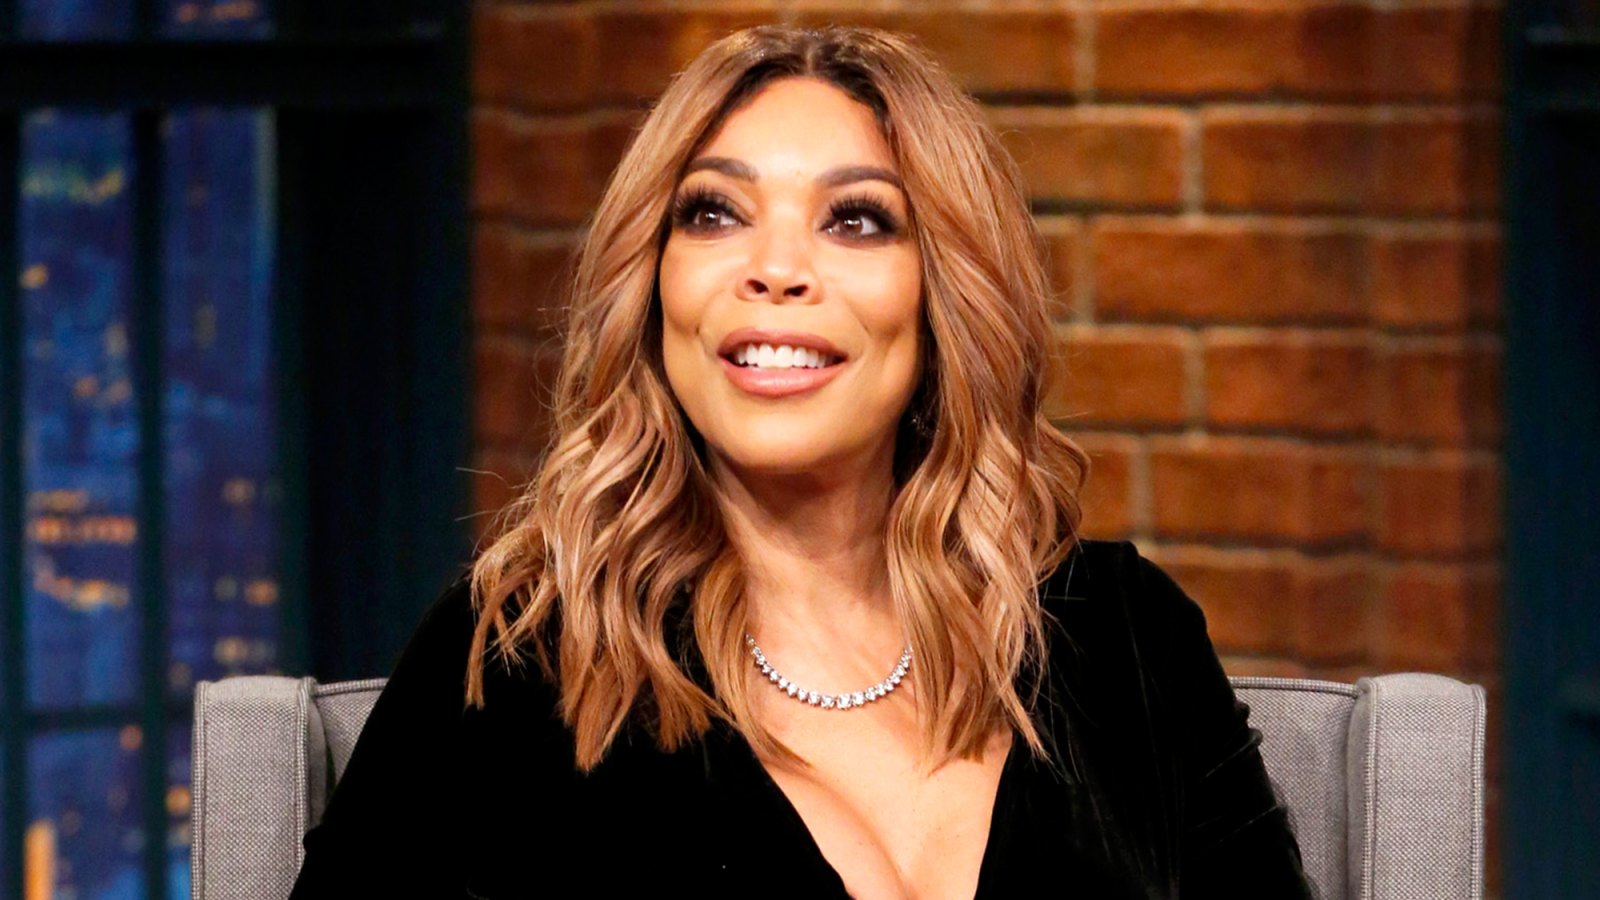 Wendy Williams on ‘Late Night with Seth Meyers‘